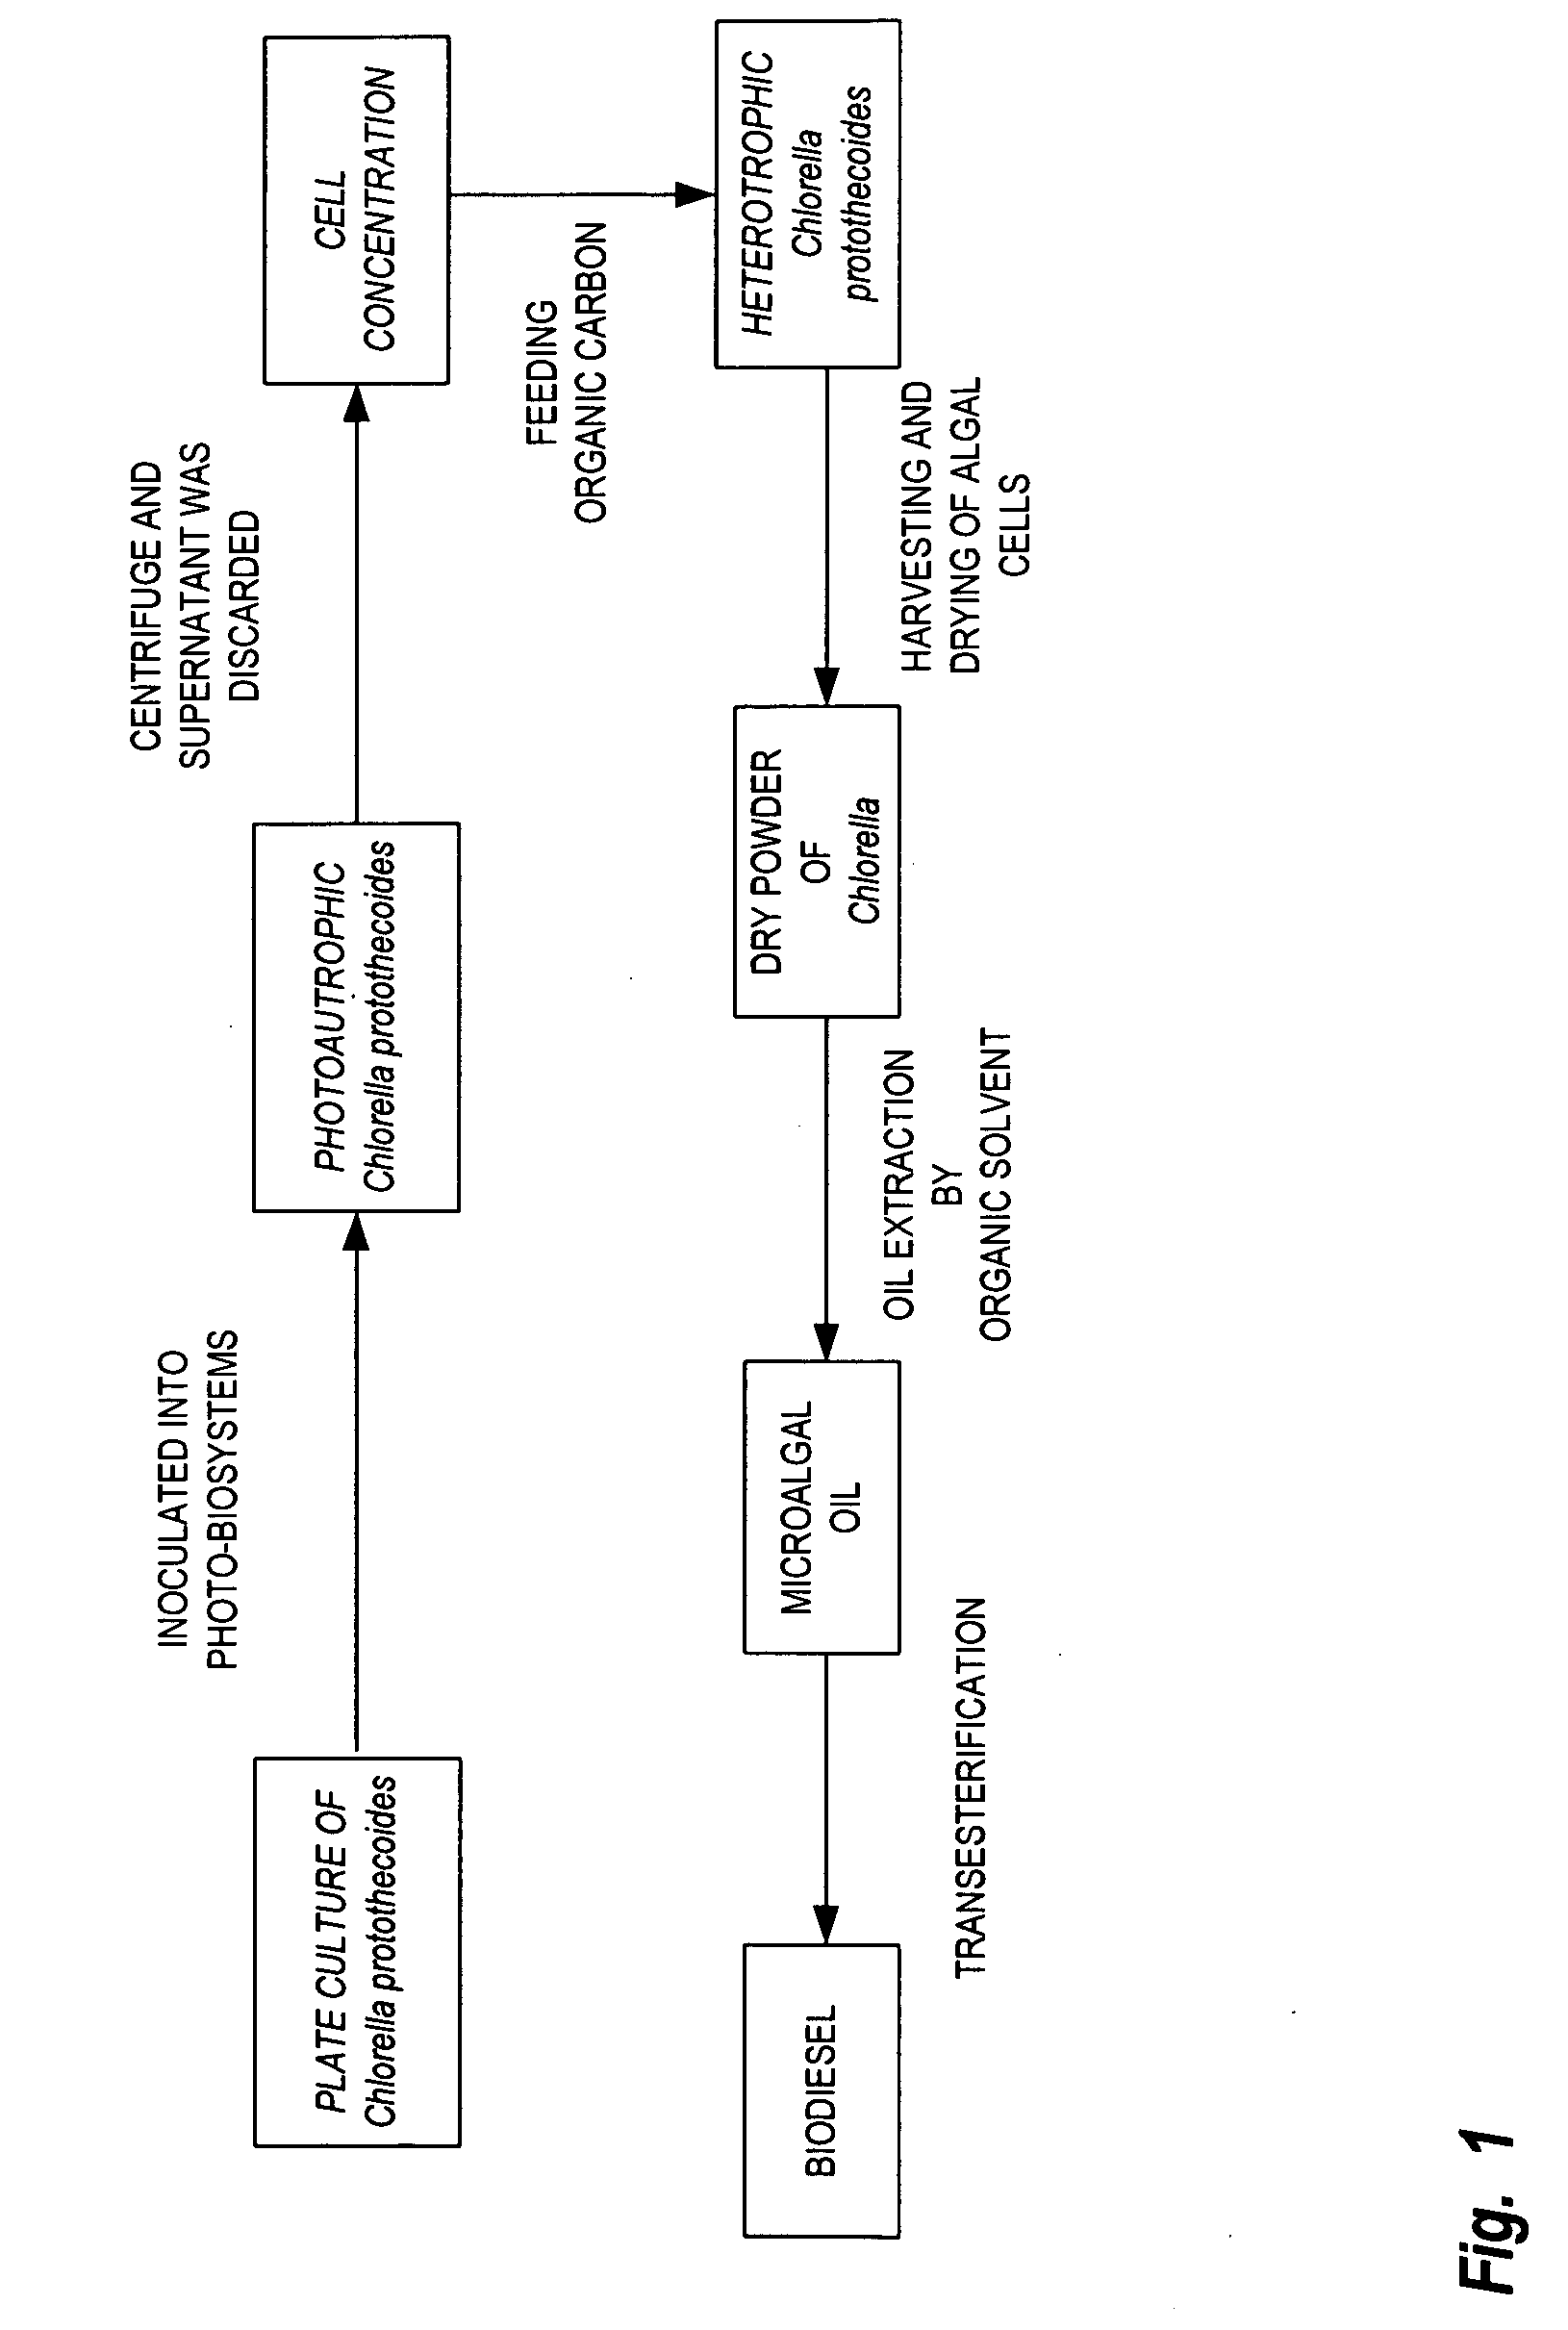 Method for producing biodiesel from an alga